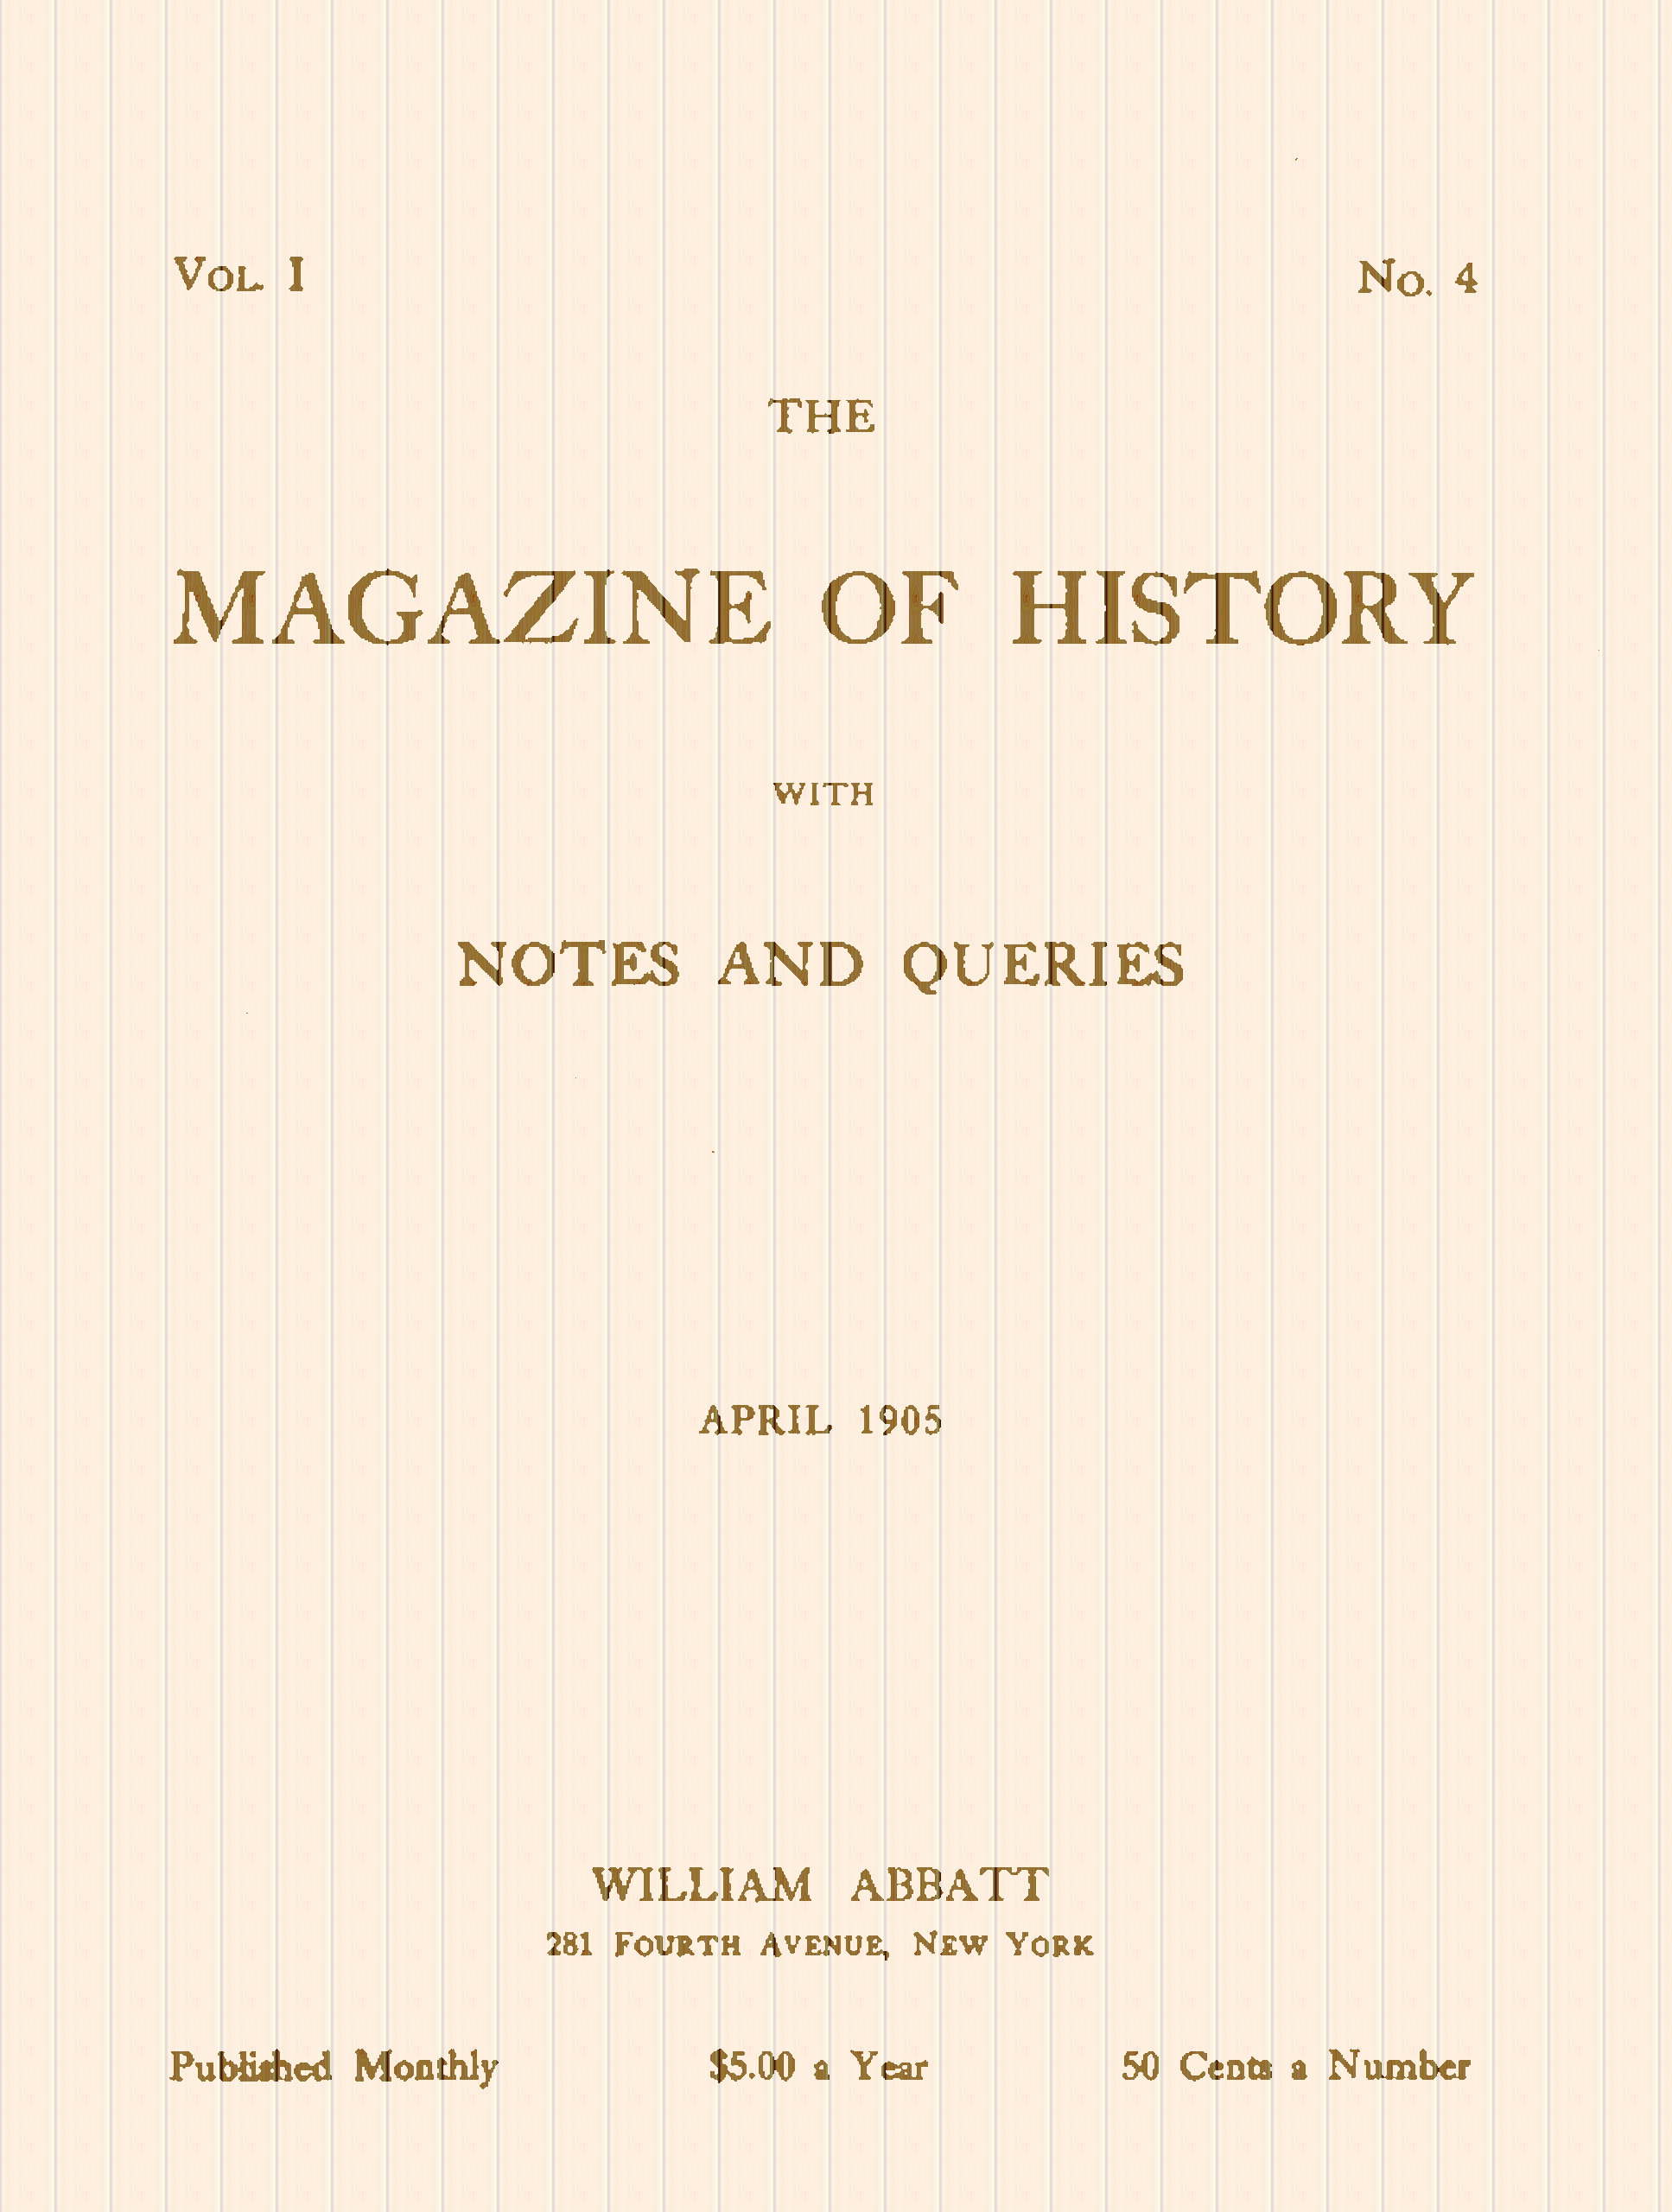 The magazine of history with notes and queries, Vol. I, No. 4, April 1905